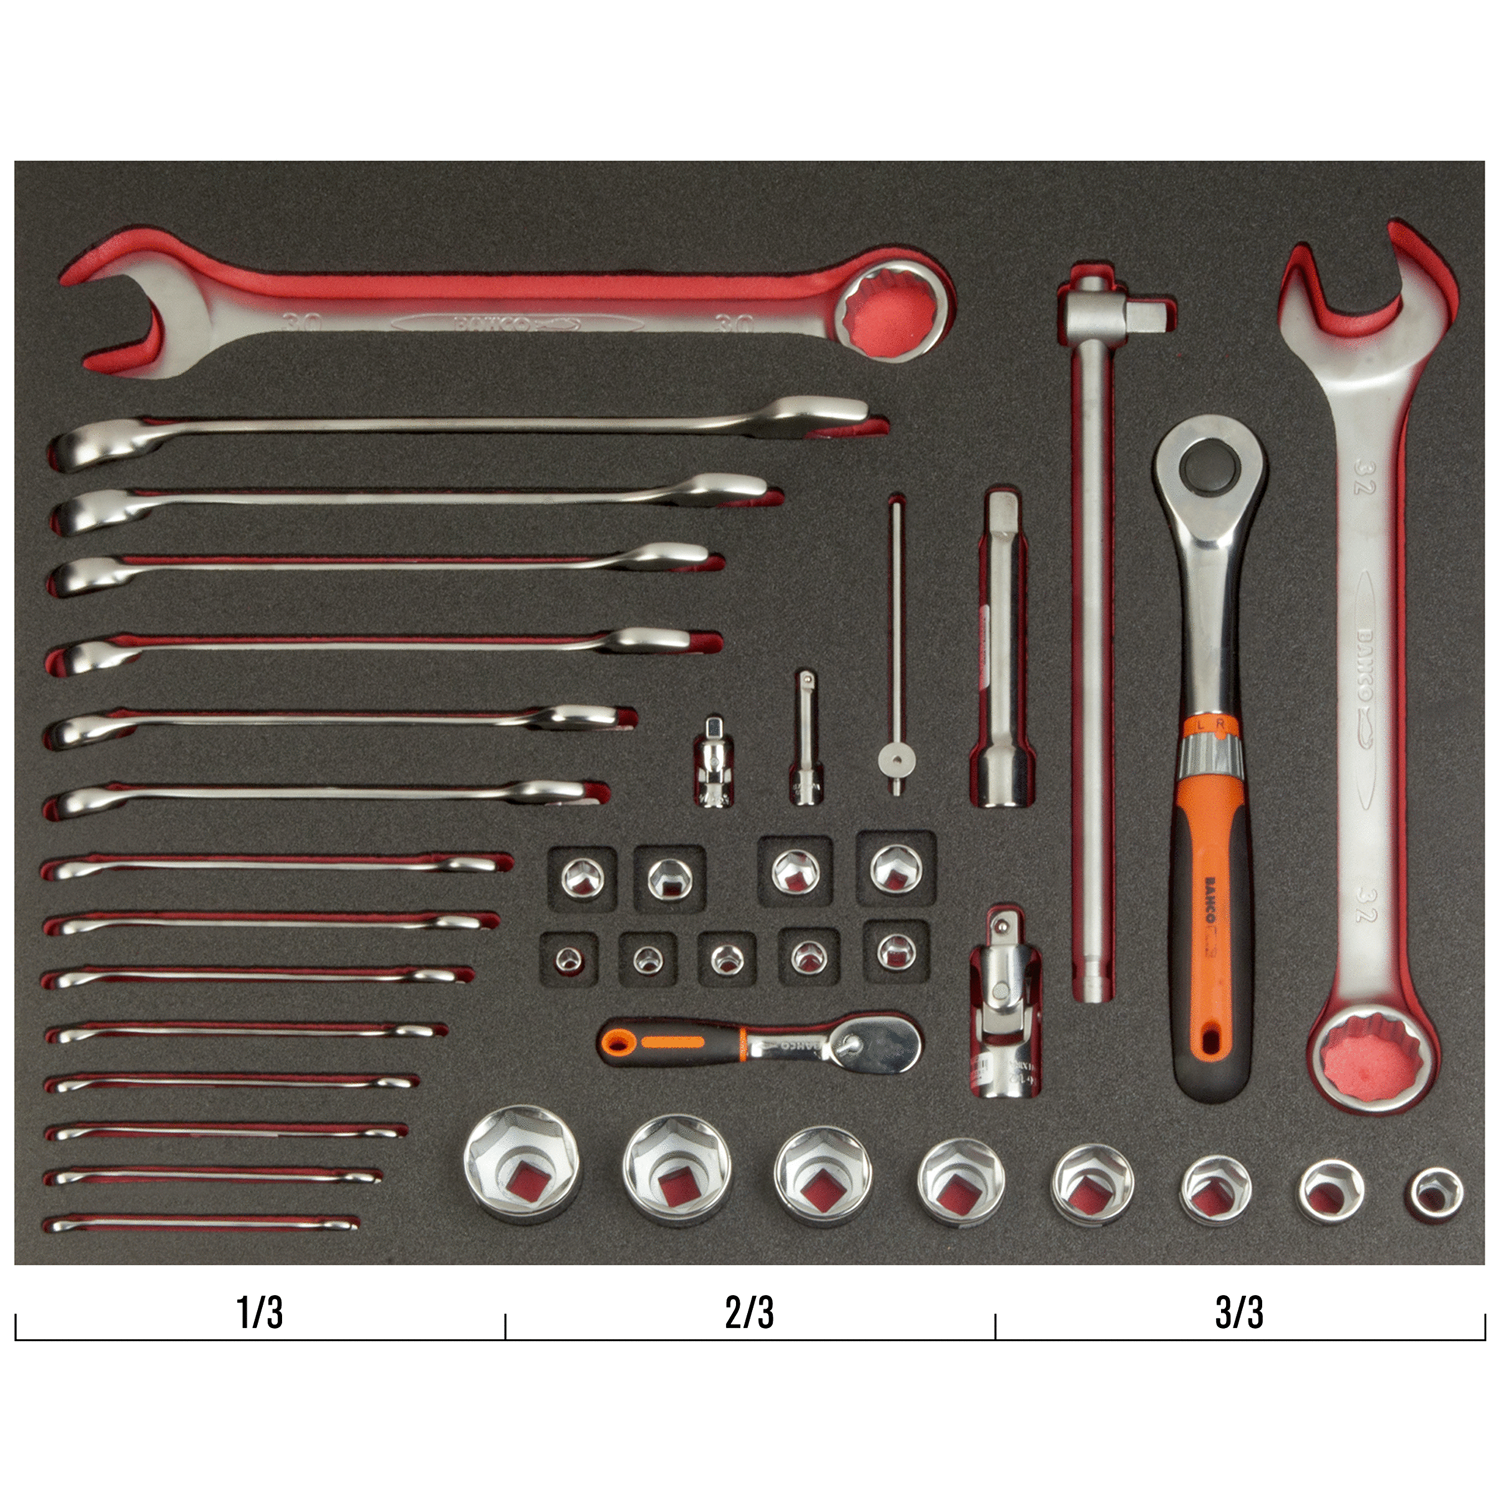 BAHCO FF1A5013 Fit&Go 3/3 Foam Socket and Combination Wrench Set - Premium Socket and Combination Wrench Set from BAHCO - Shop now at Yew Aik.